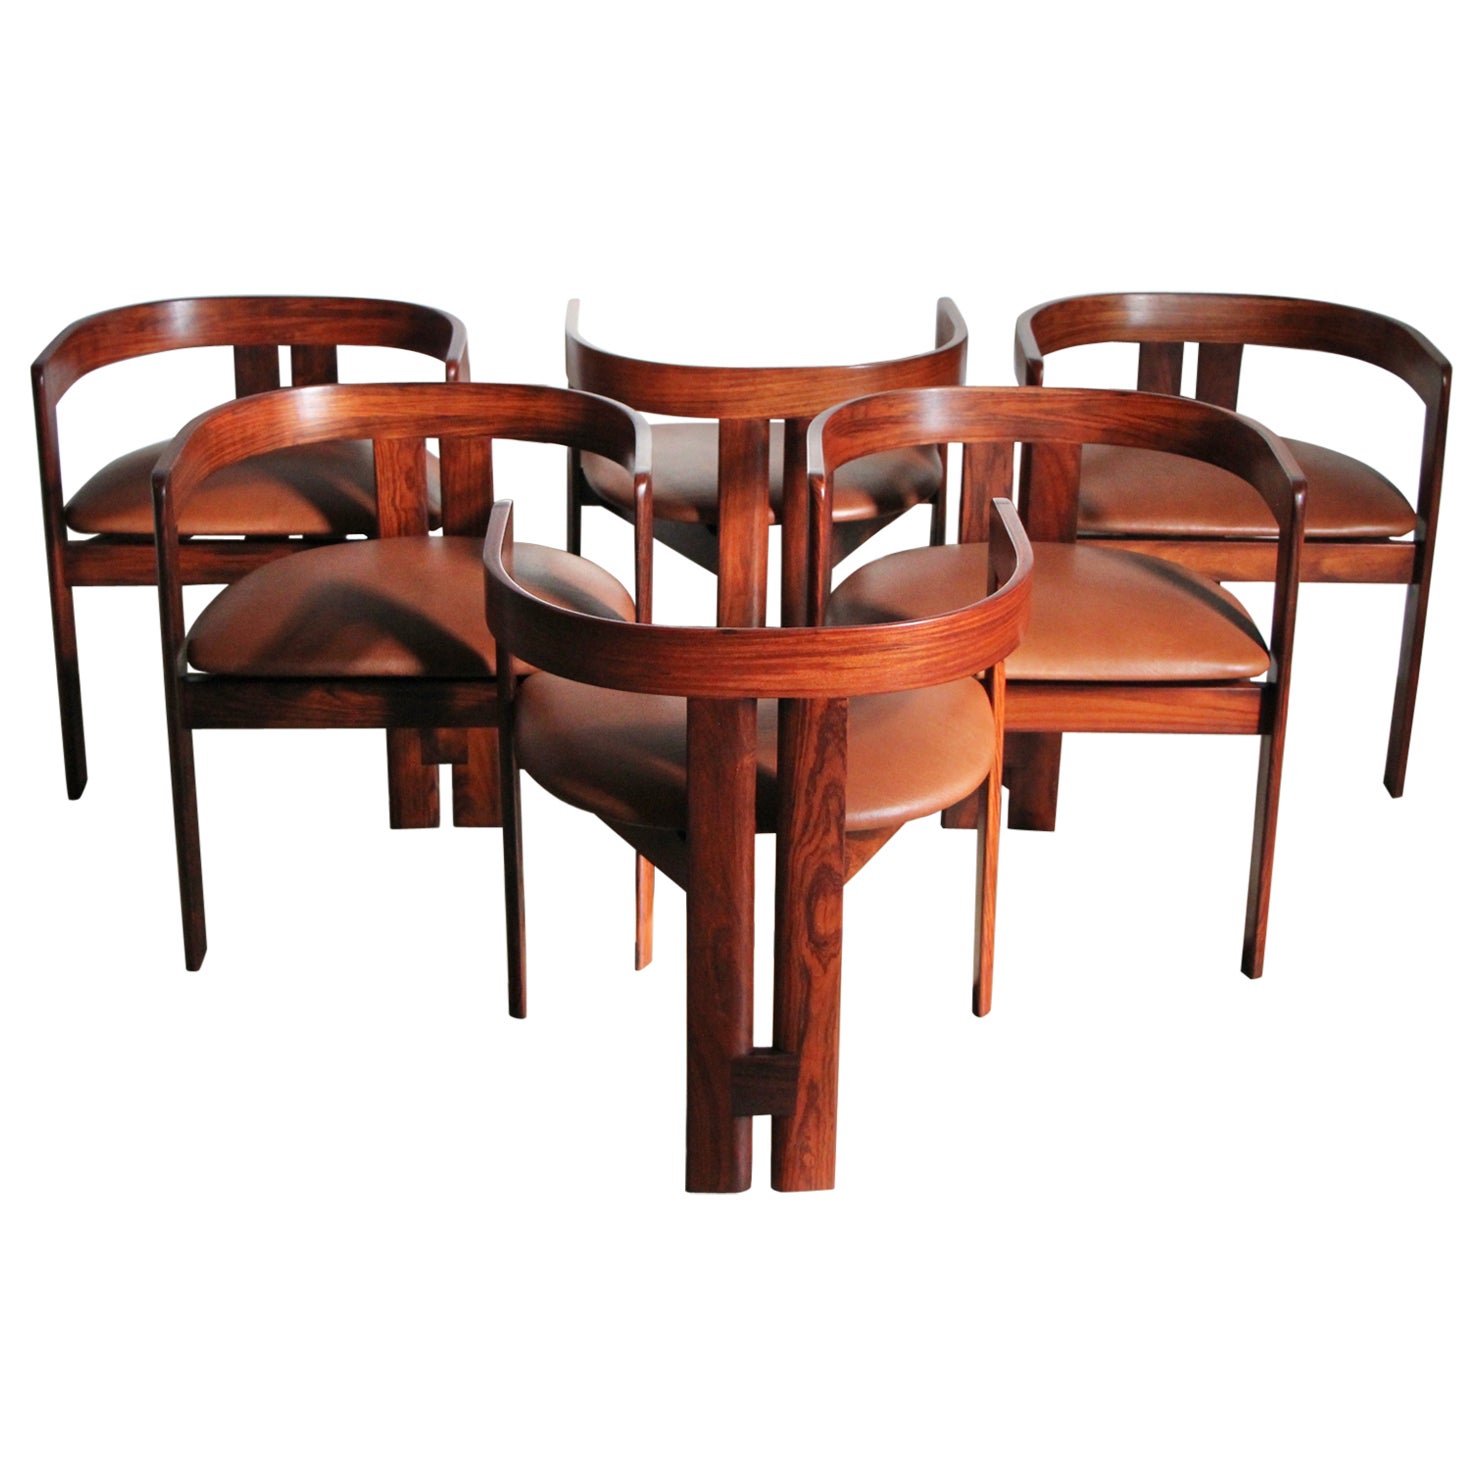 Tobia Scarpa Sculpted Rosewood and Leather "Pegreco" Dining Chairs